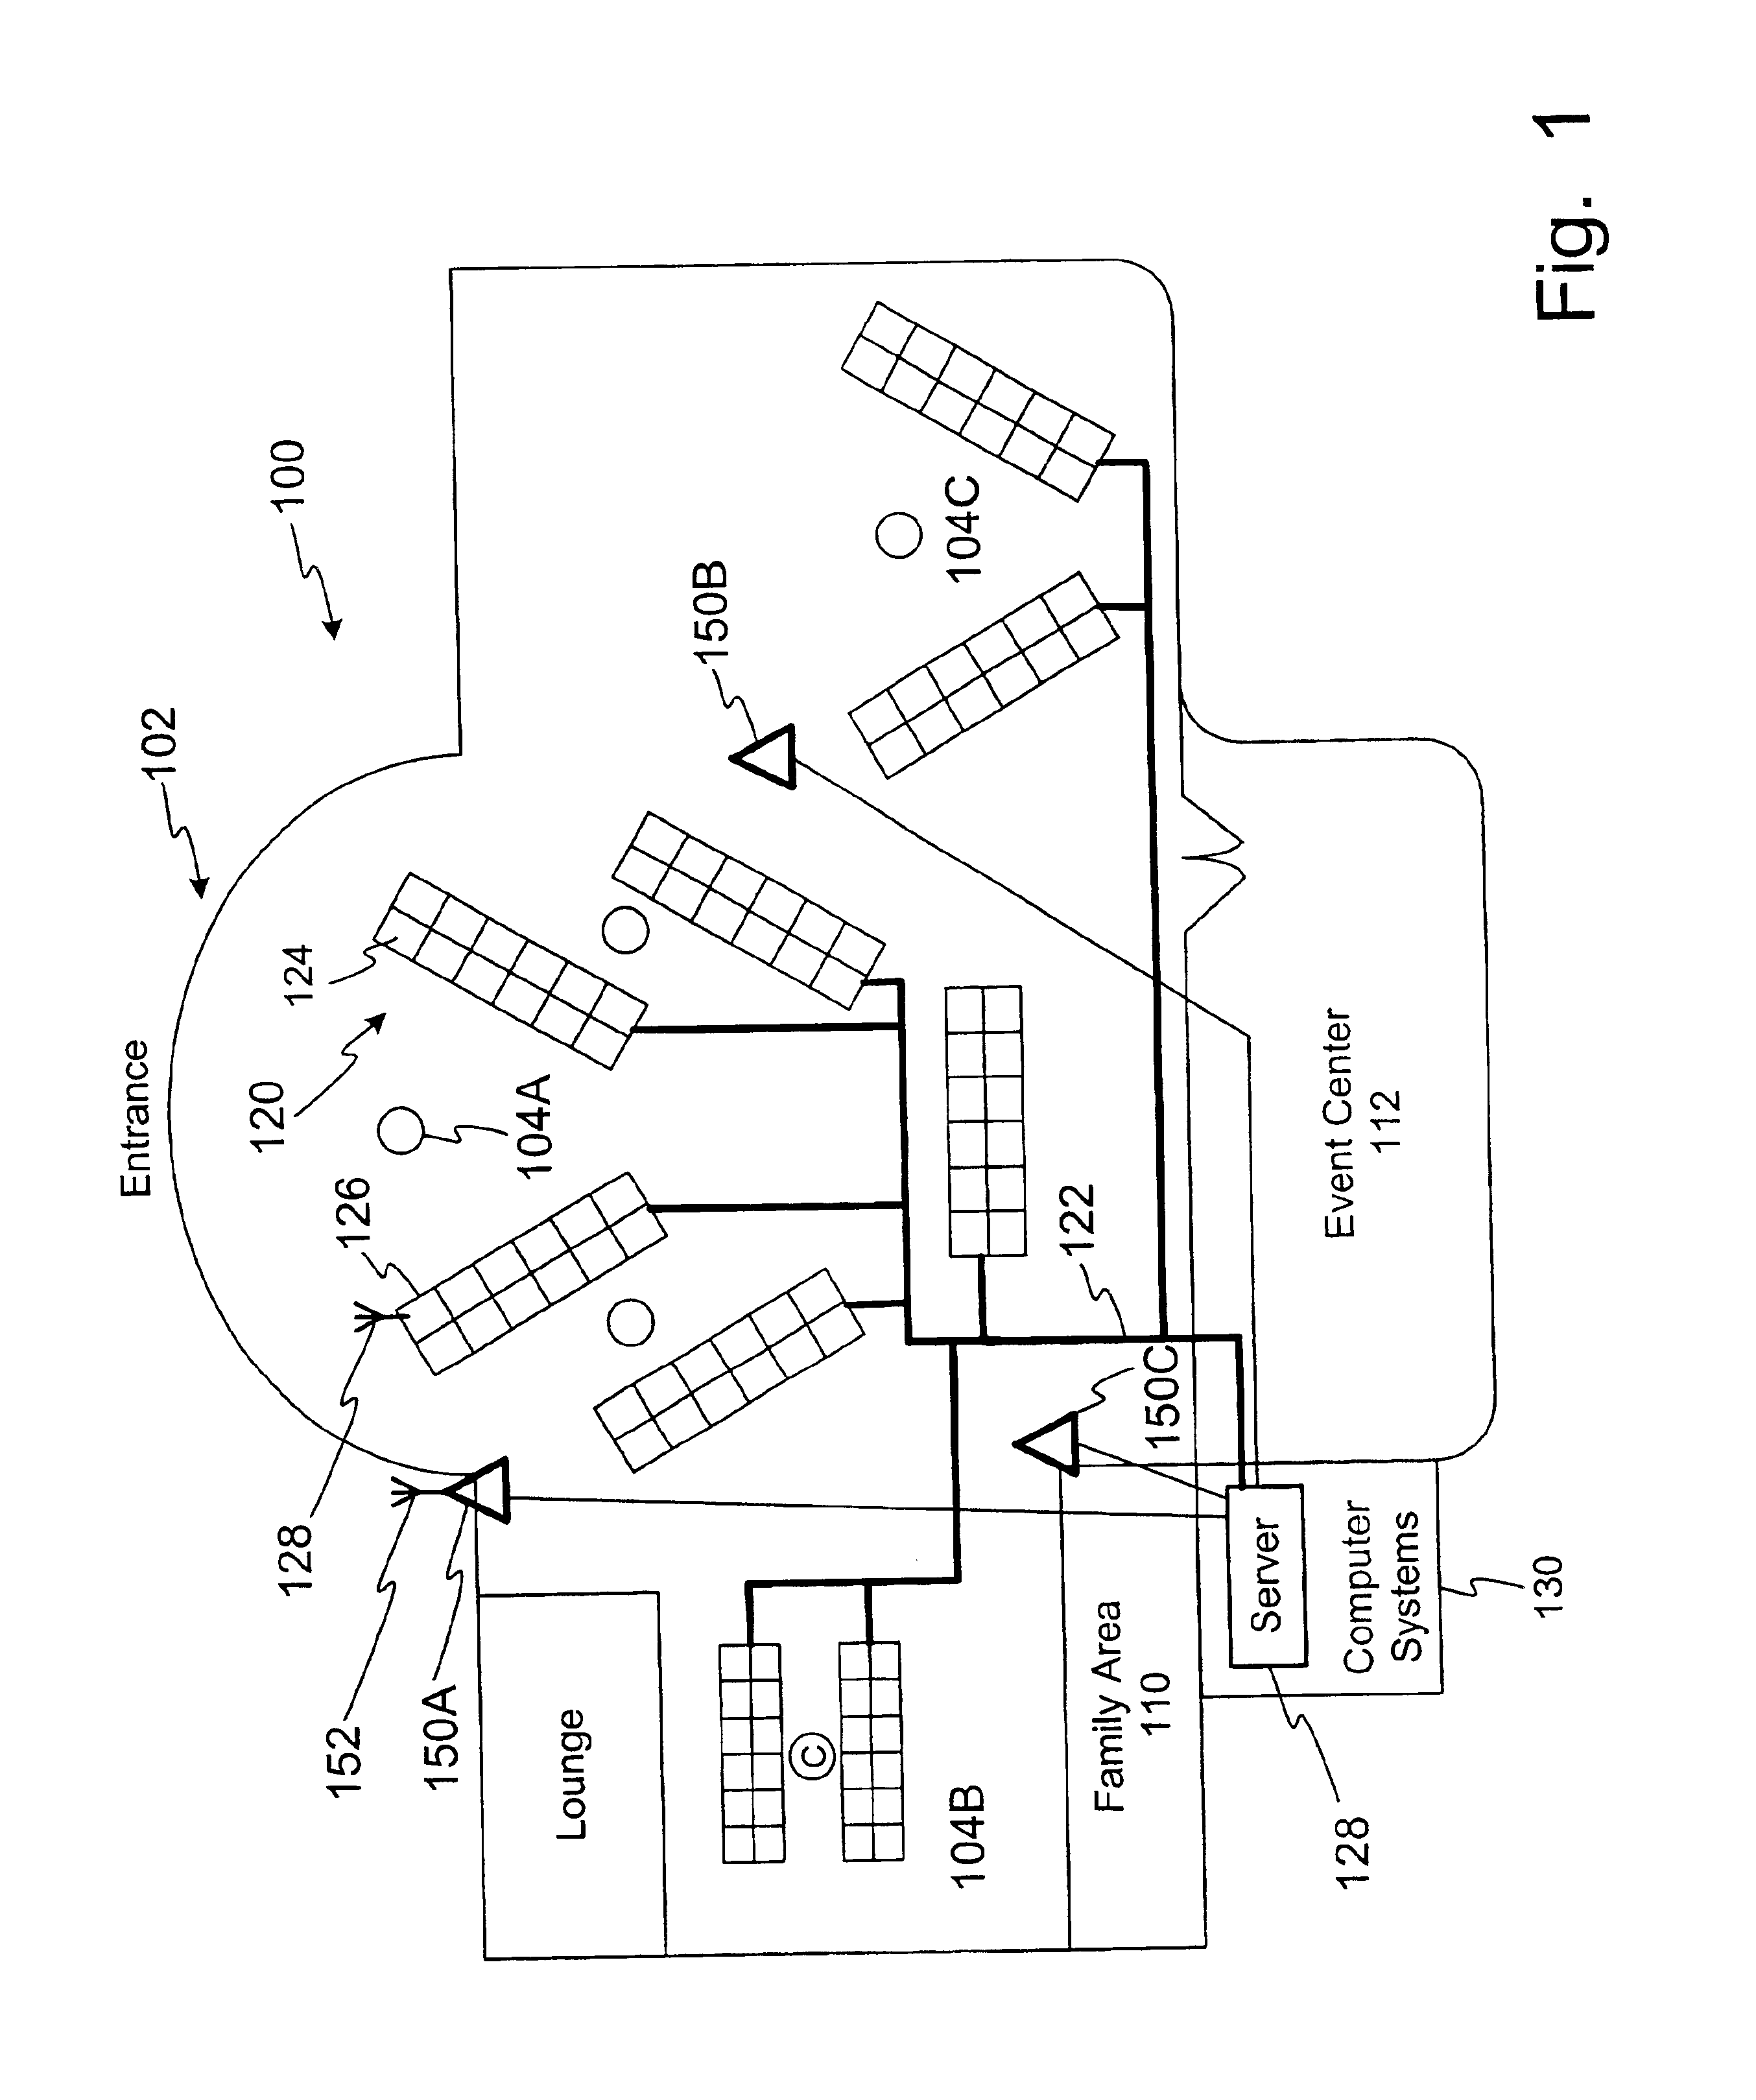 Method and apparatus for monitoring or controlling a gaming machine based on gaming machine location